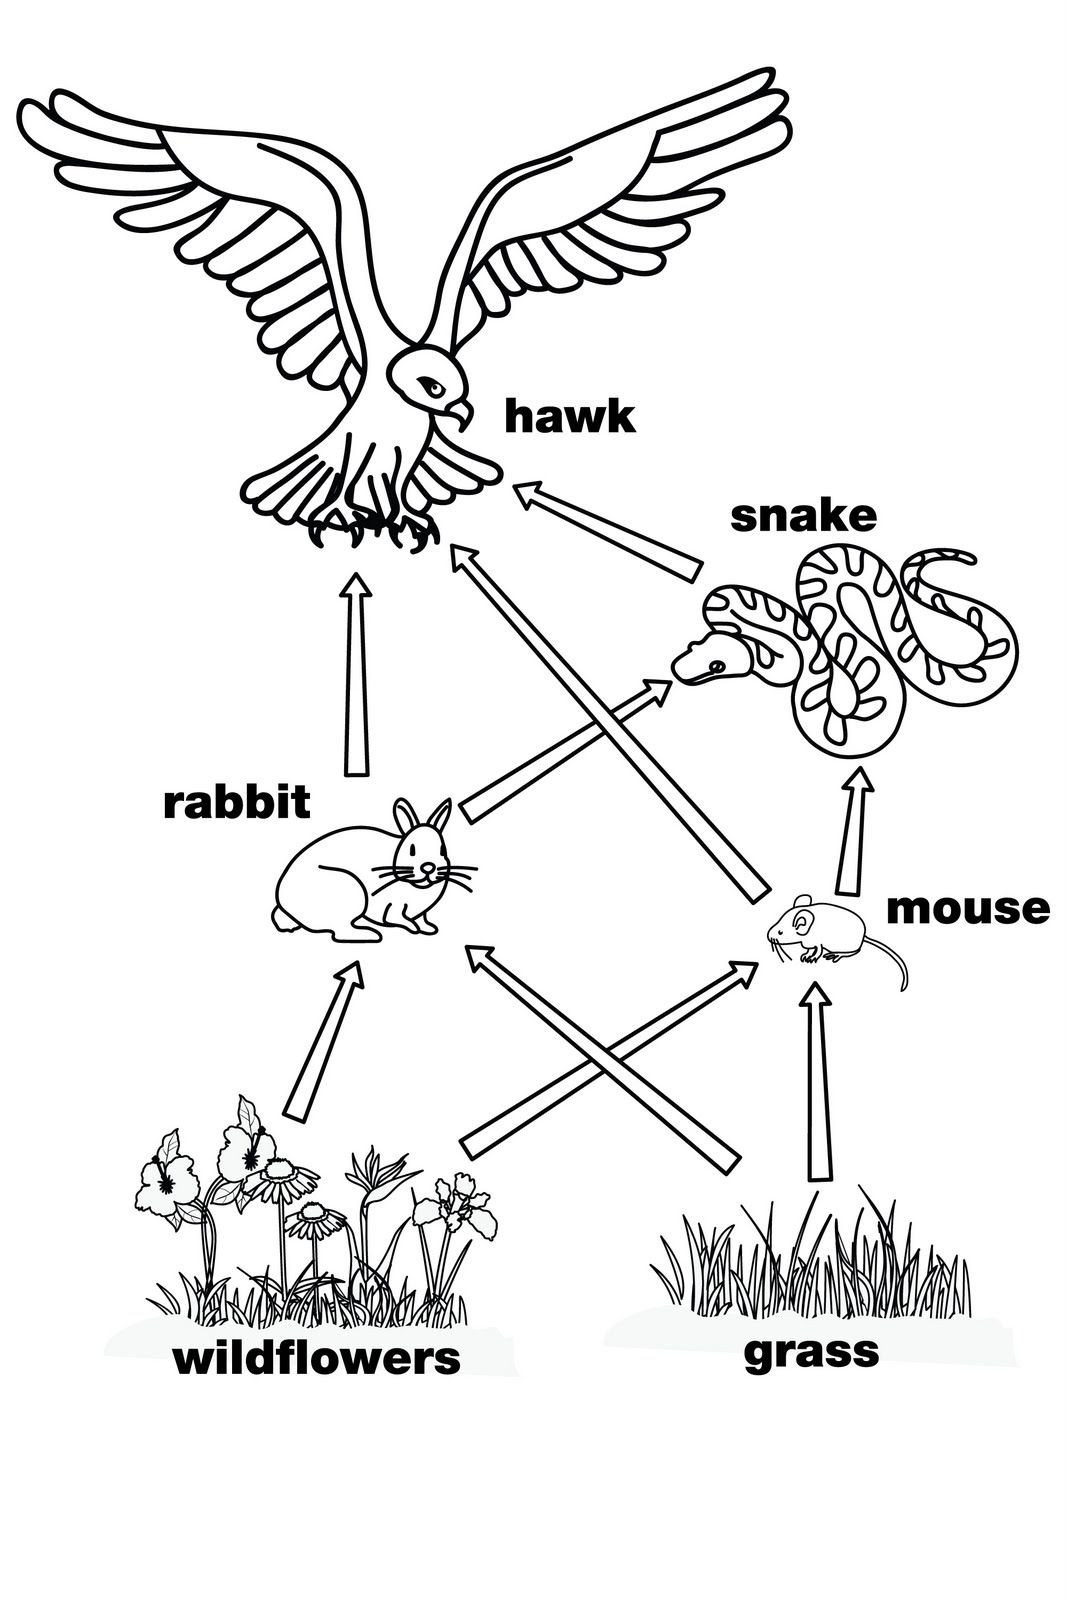 Food Chains and Webs Worksheet Food Web This is A Perfect Diagram for the Food Web